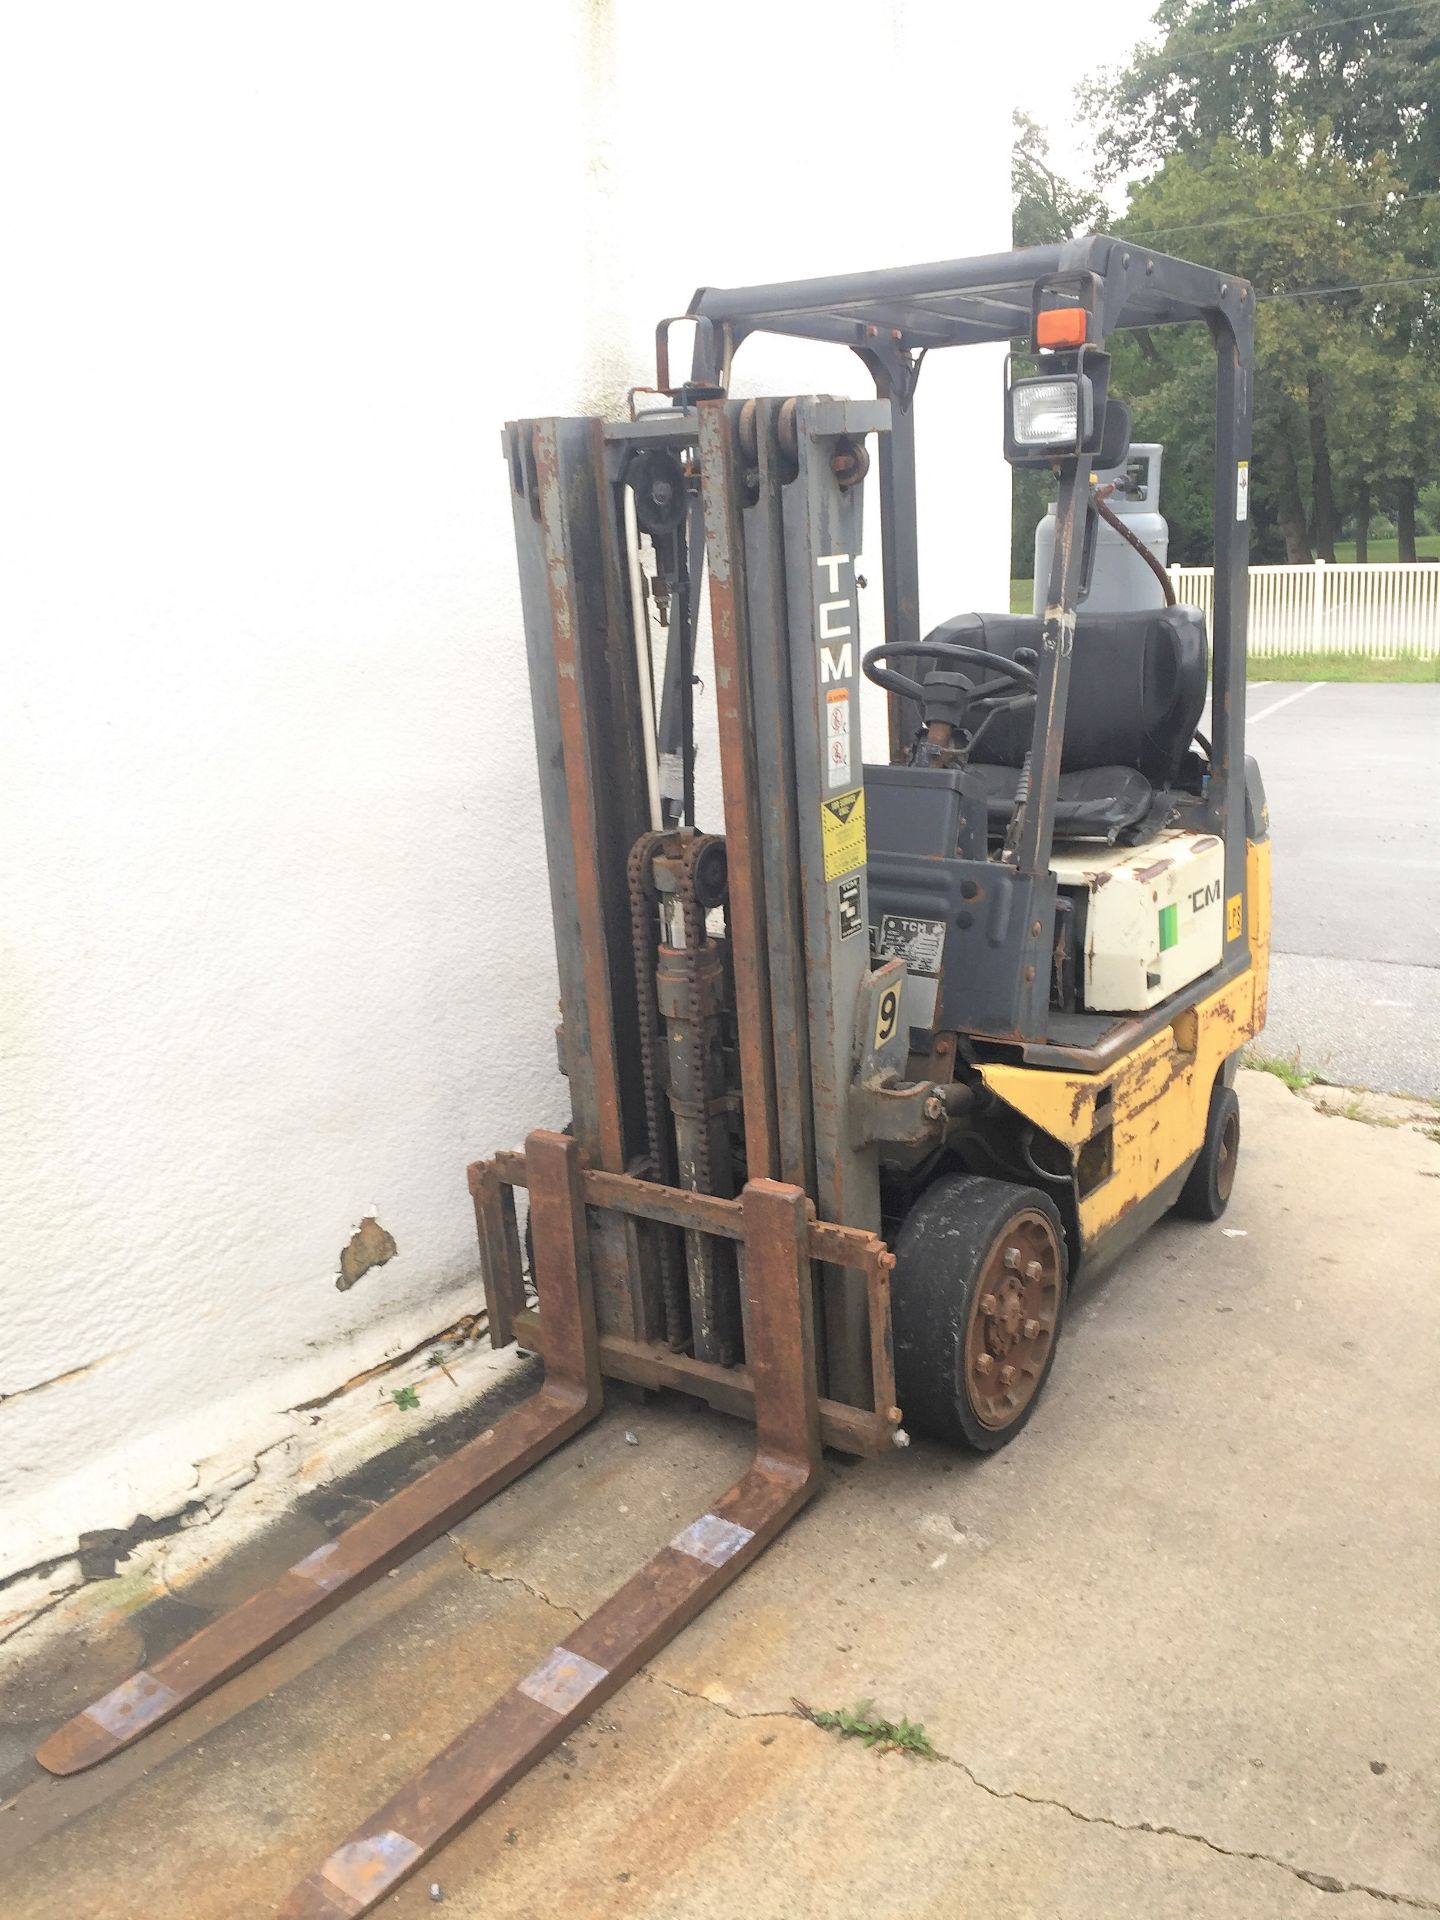 TCM 3000 LB forklift Model FCG15T8T. Buyer agrees to leave the forklift on location for 1 week so - Image 4 of 5